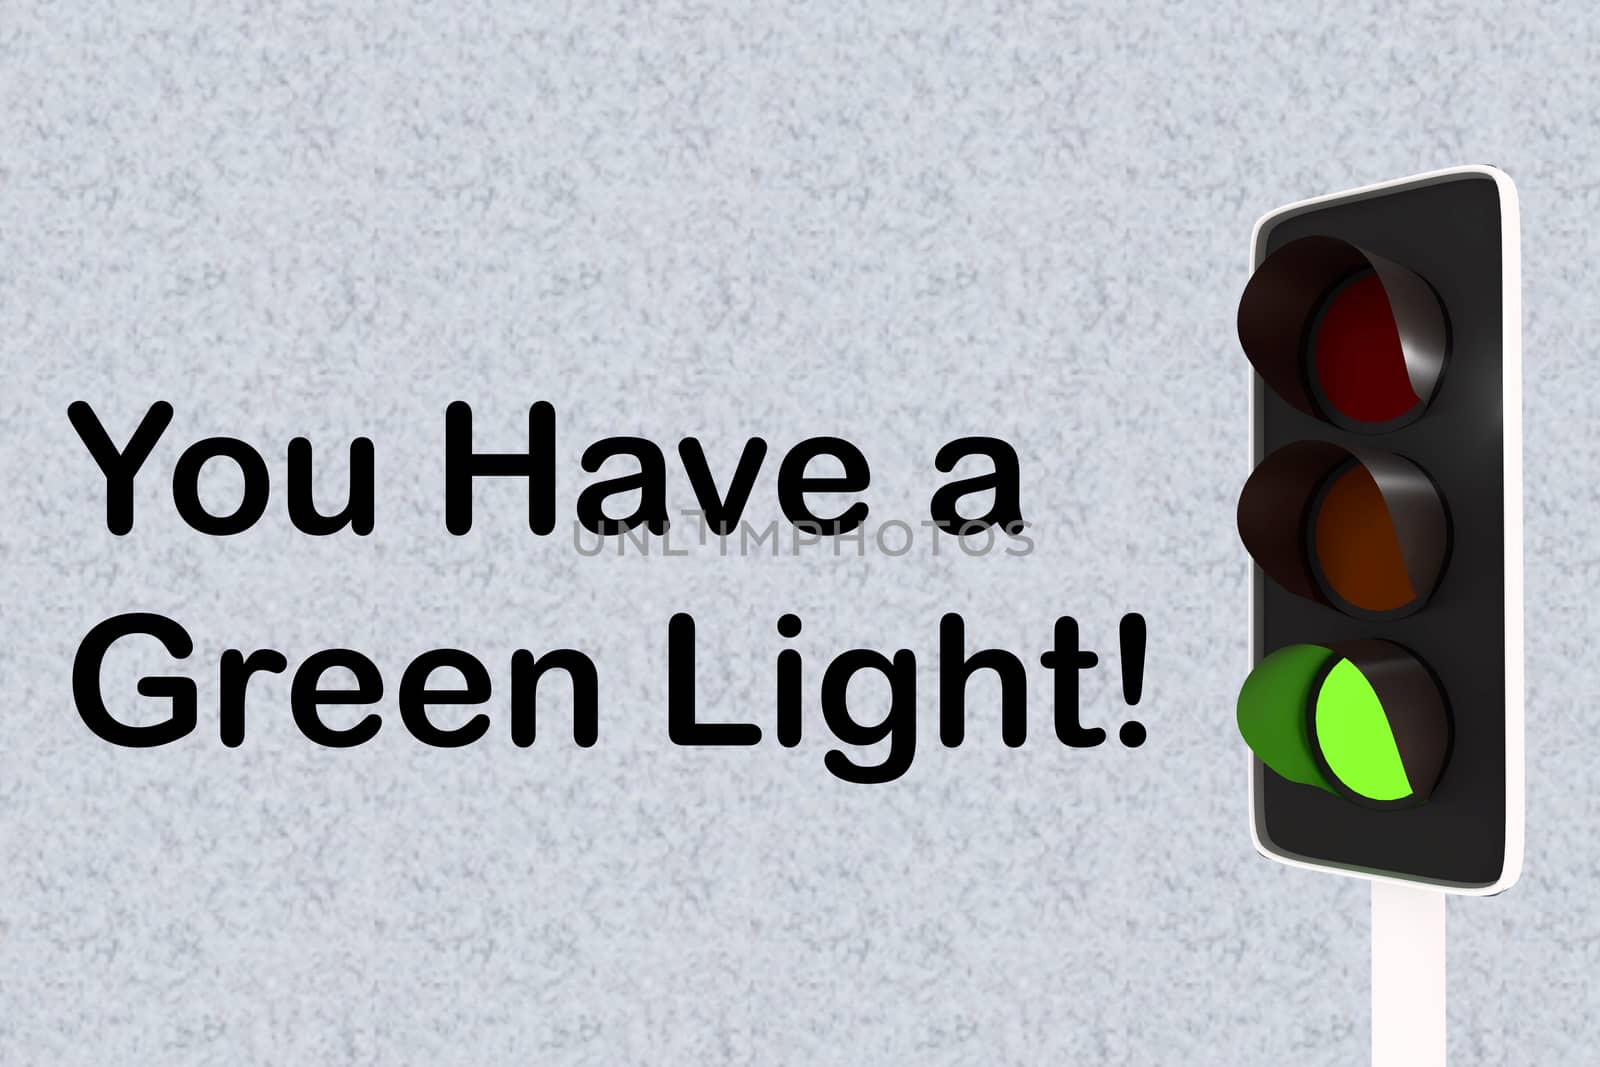 You Have a Green Light! concept by HD_premium_shots